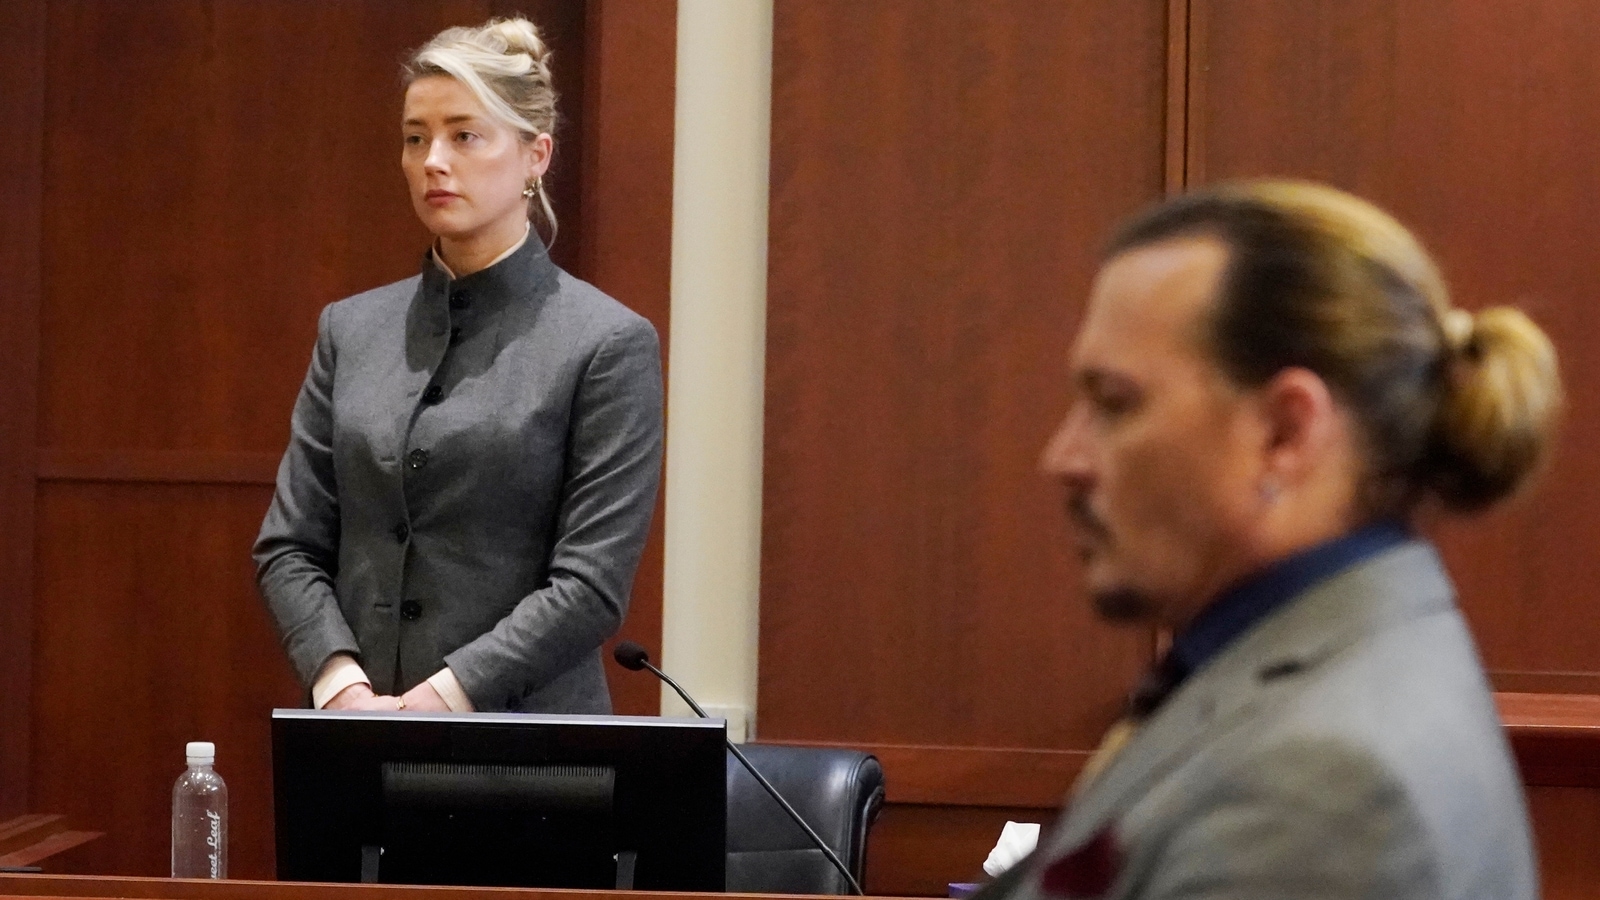 Johnny Depp was ‘real’; Amber Heard made jury ‘uncomfortable’ with stares, shed ‘crocodile tears’, says juror